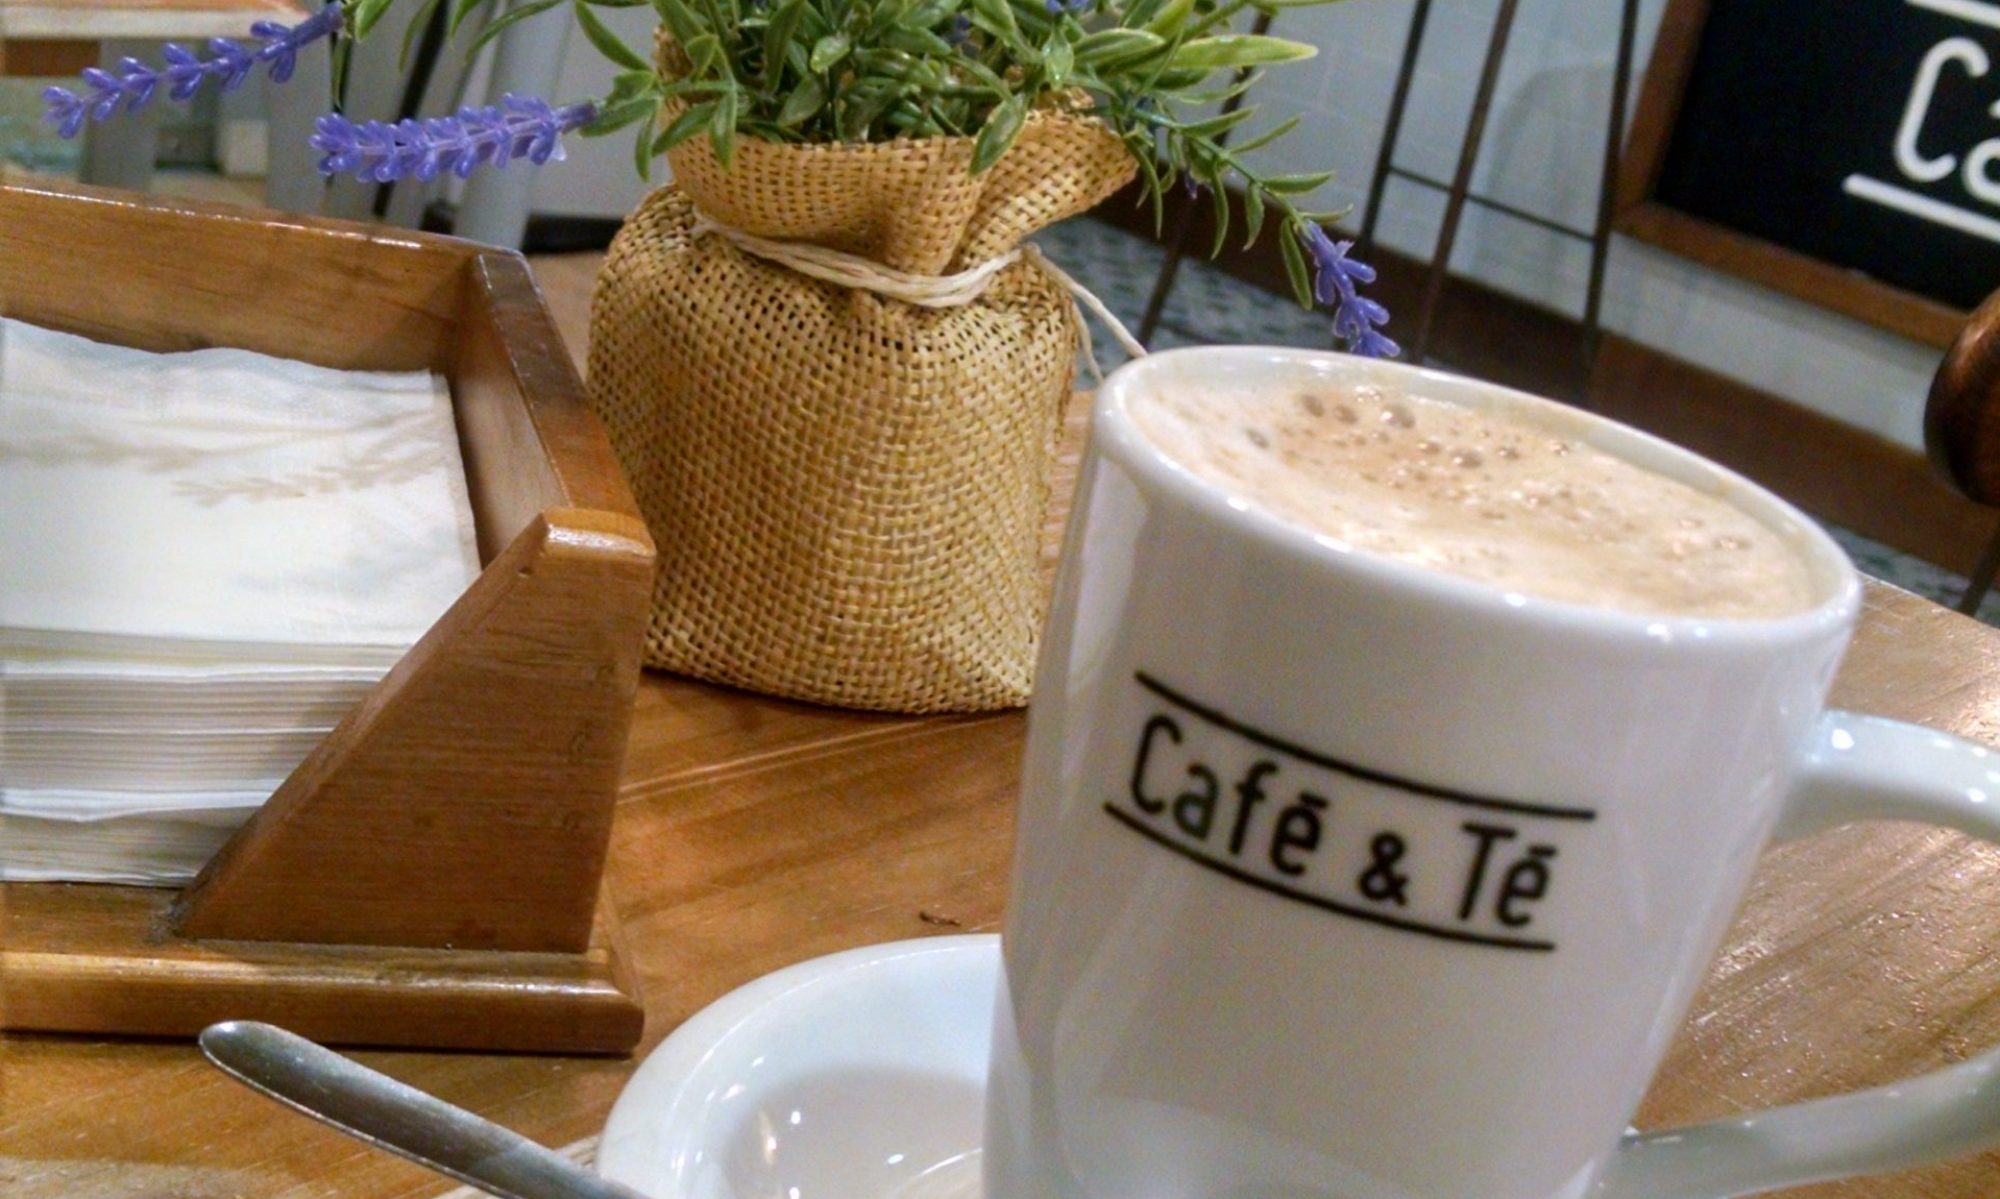 Fancy mug of a tea latte from a cafe in Madrid (called Cafe a Te) from my trip in 2017. It's close focus on a cute cup and saucer on a wood table with a cute little table plant in the background